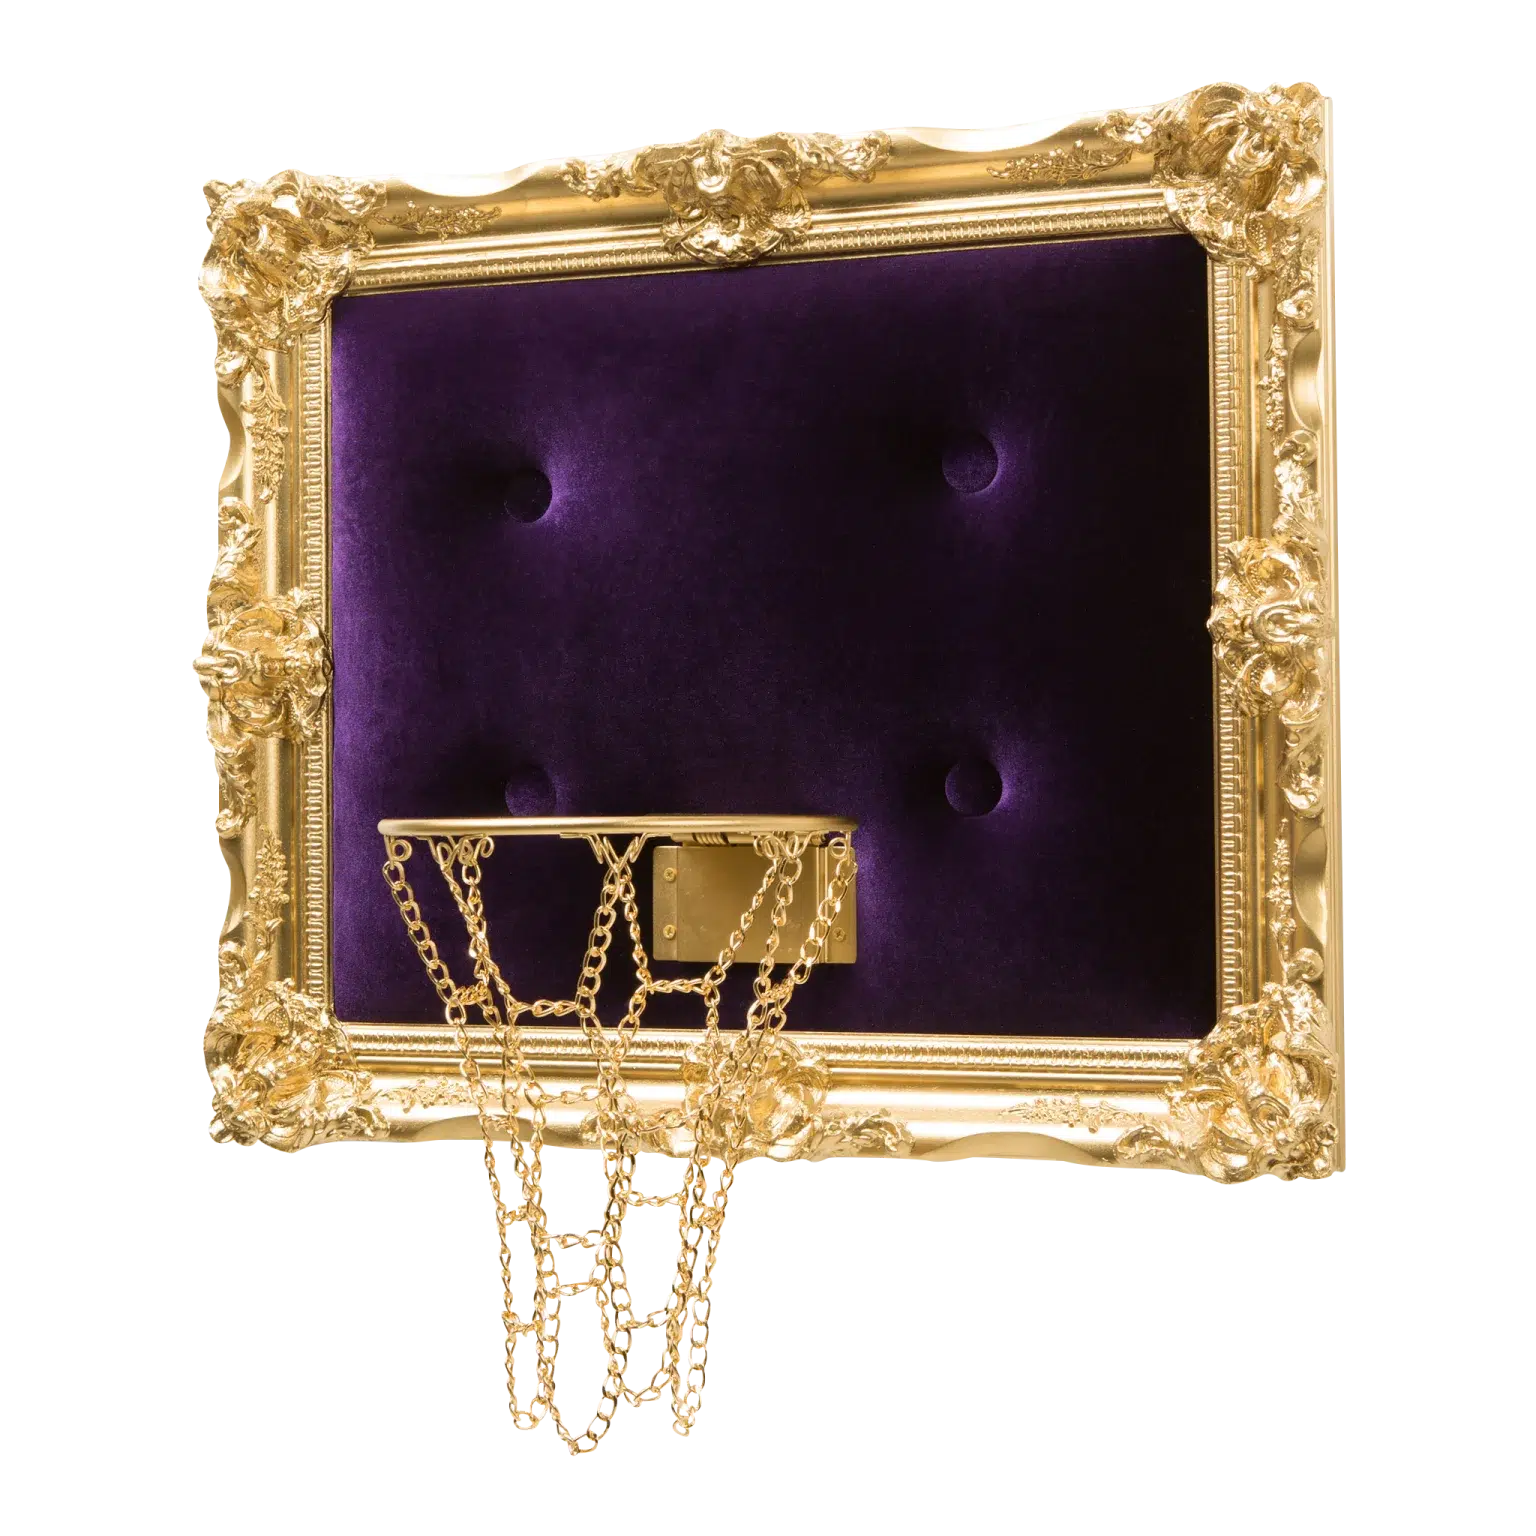 A Purple Velvet Hoop with a gold frame.